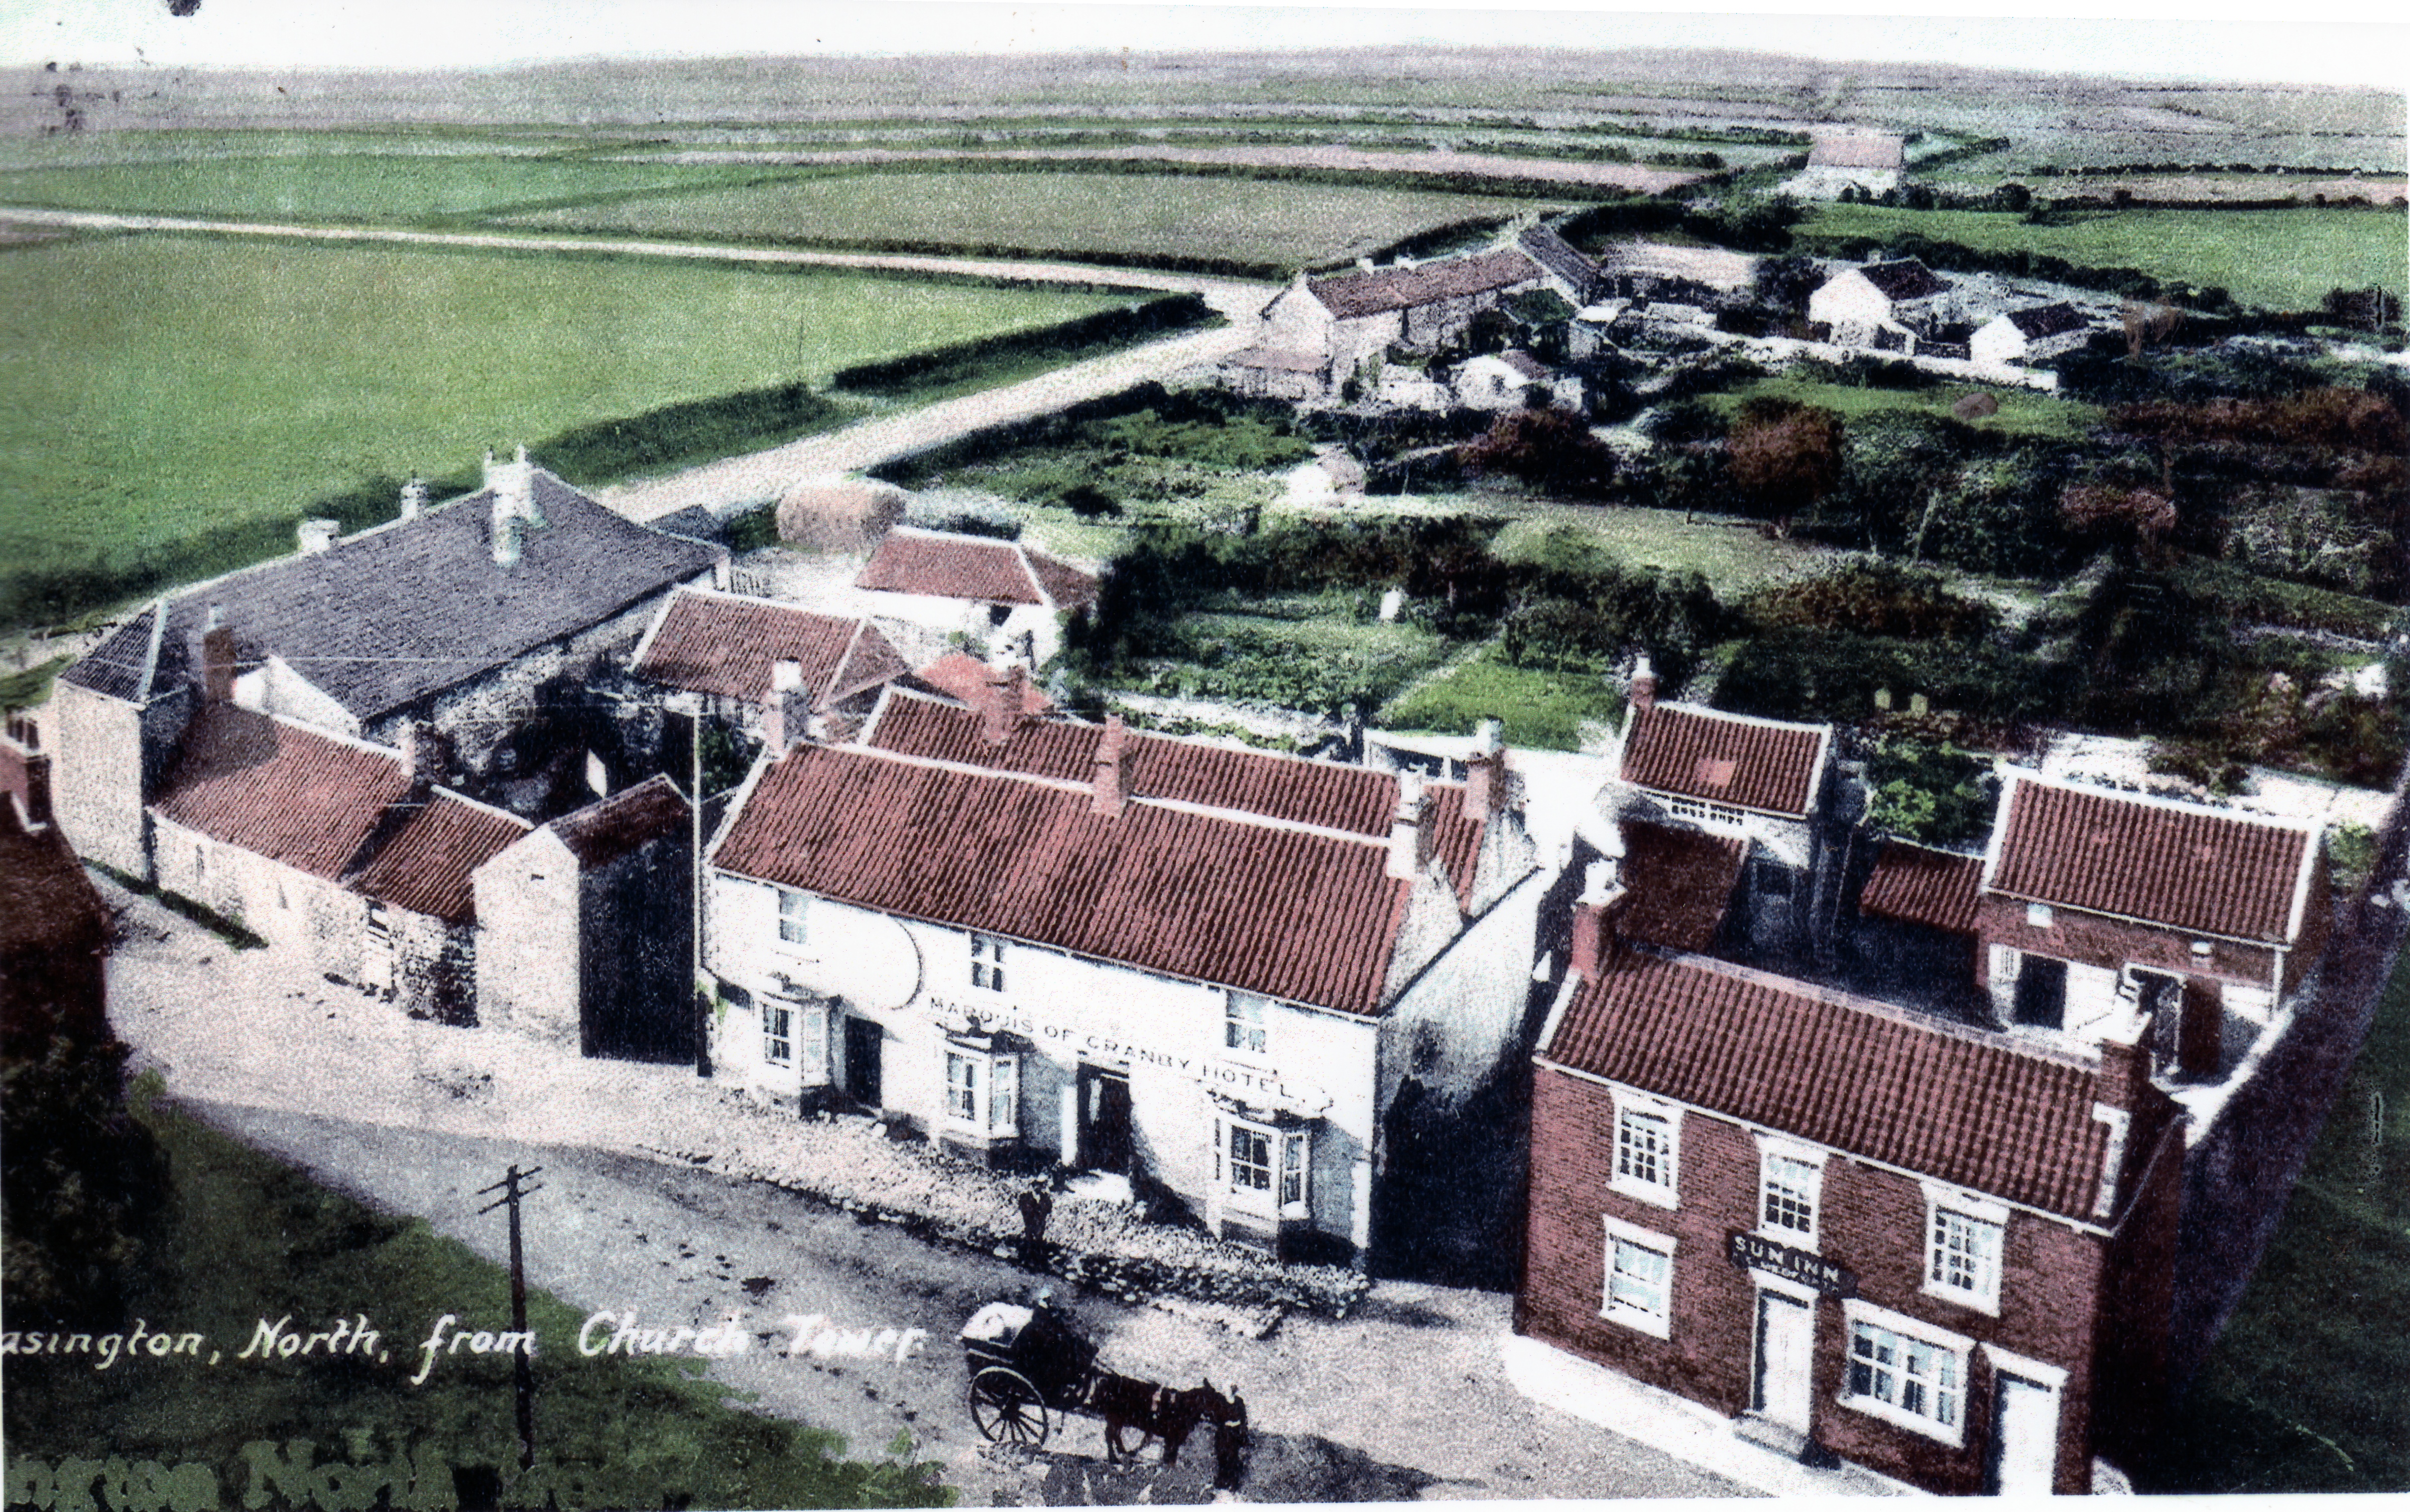 This picture shows the two pubs side by side, taken in 1905